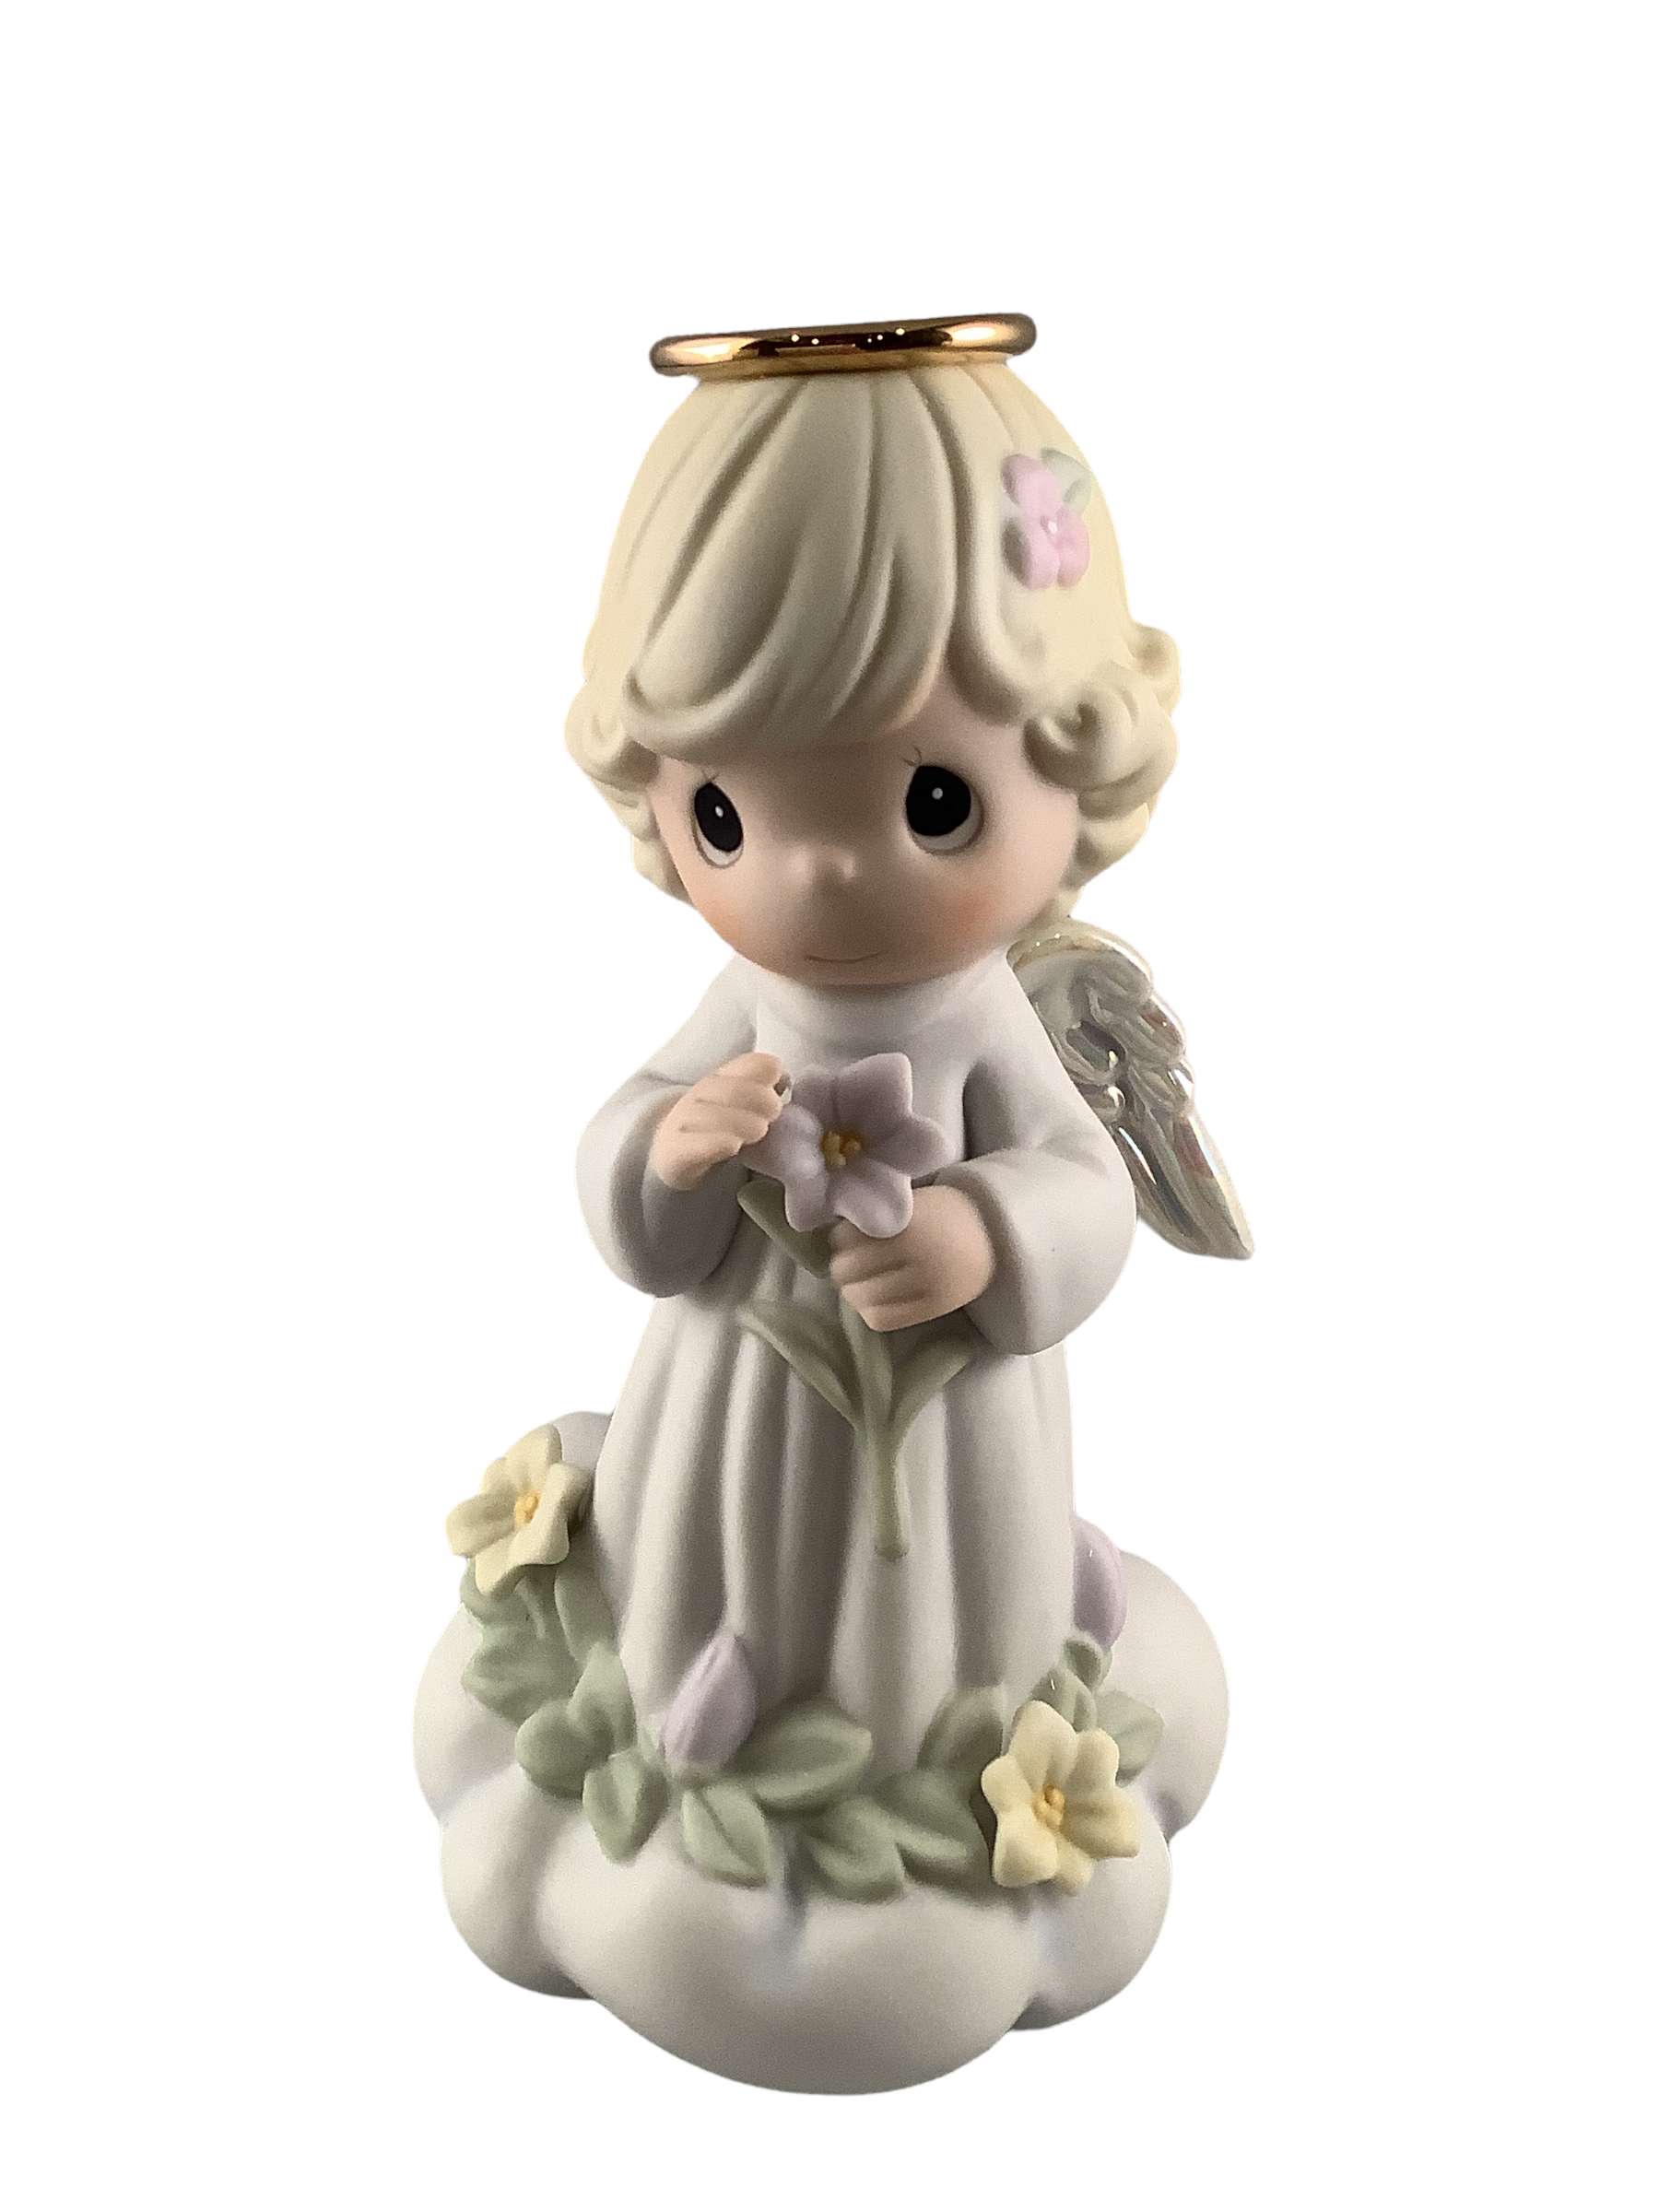 Let Not Your Heart Be Troubled - Precious Moment Figurine